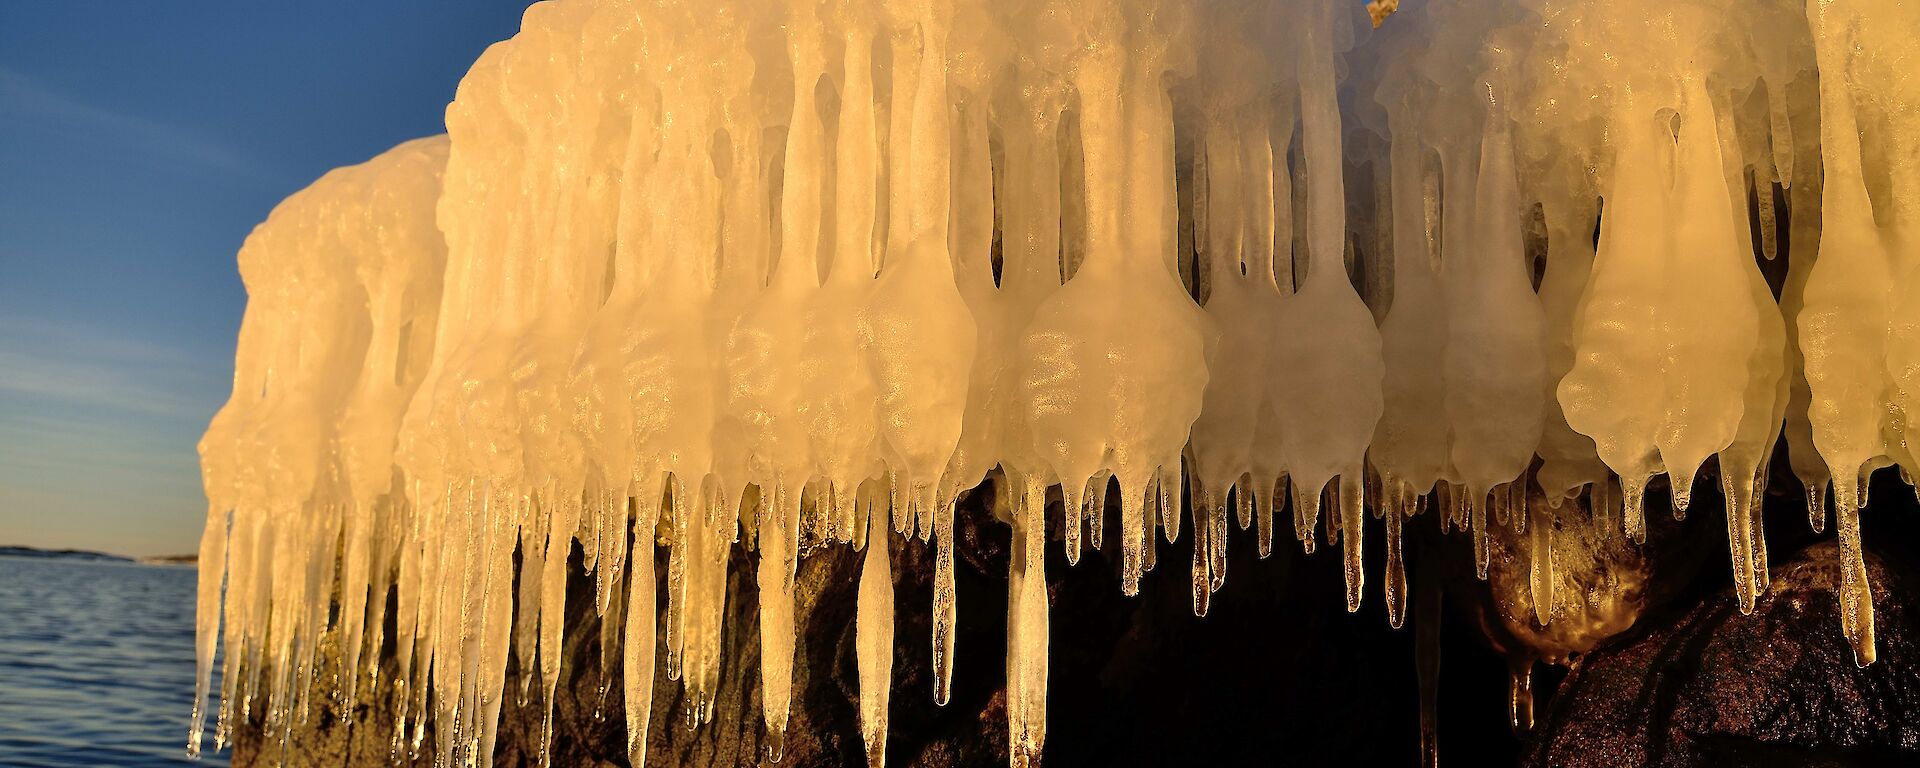 Icicles forming over a rock edge on a harbour edge.